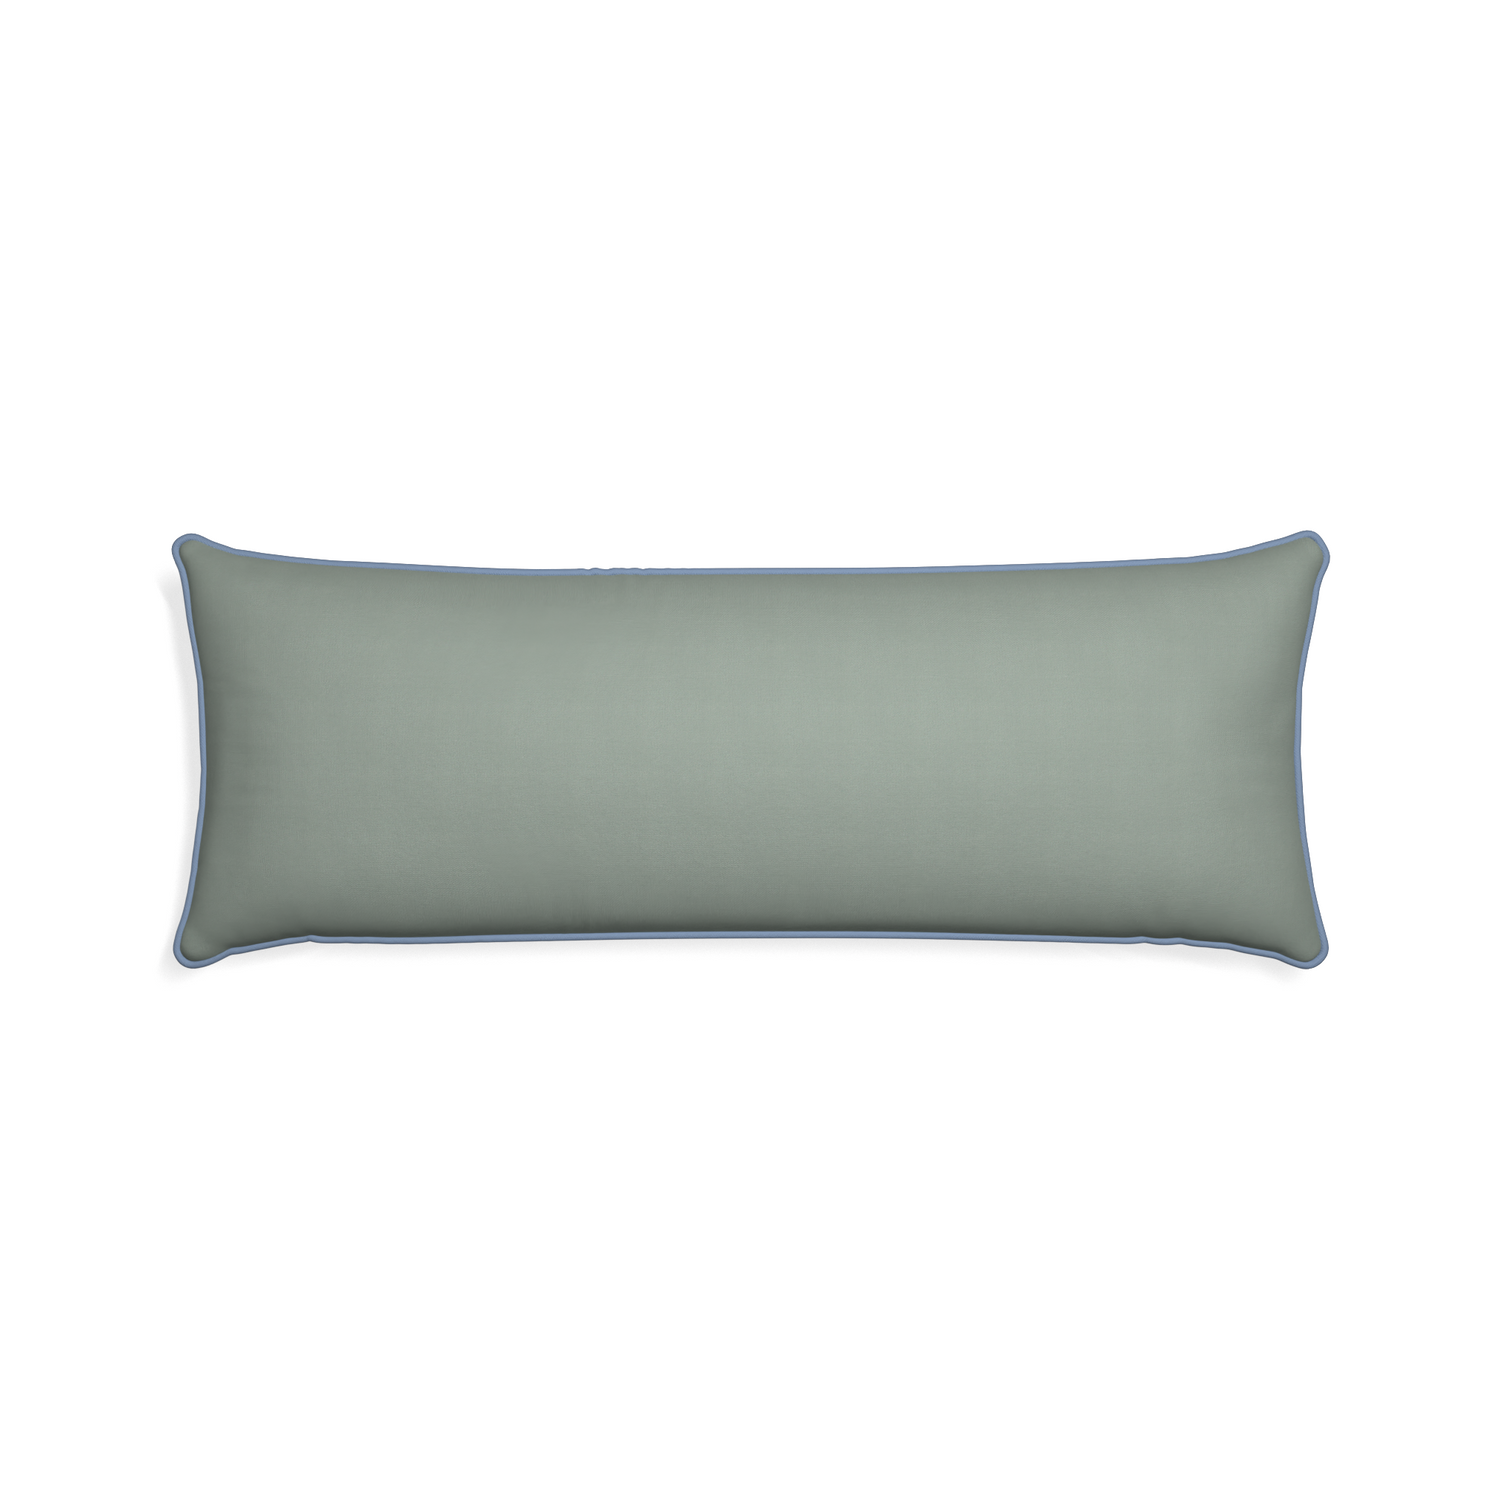 Xl-lumbar sage custom sage green cottonpillow with sky piping on white background